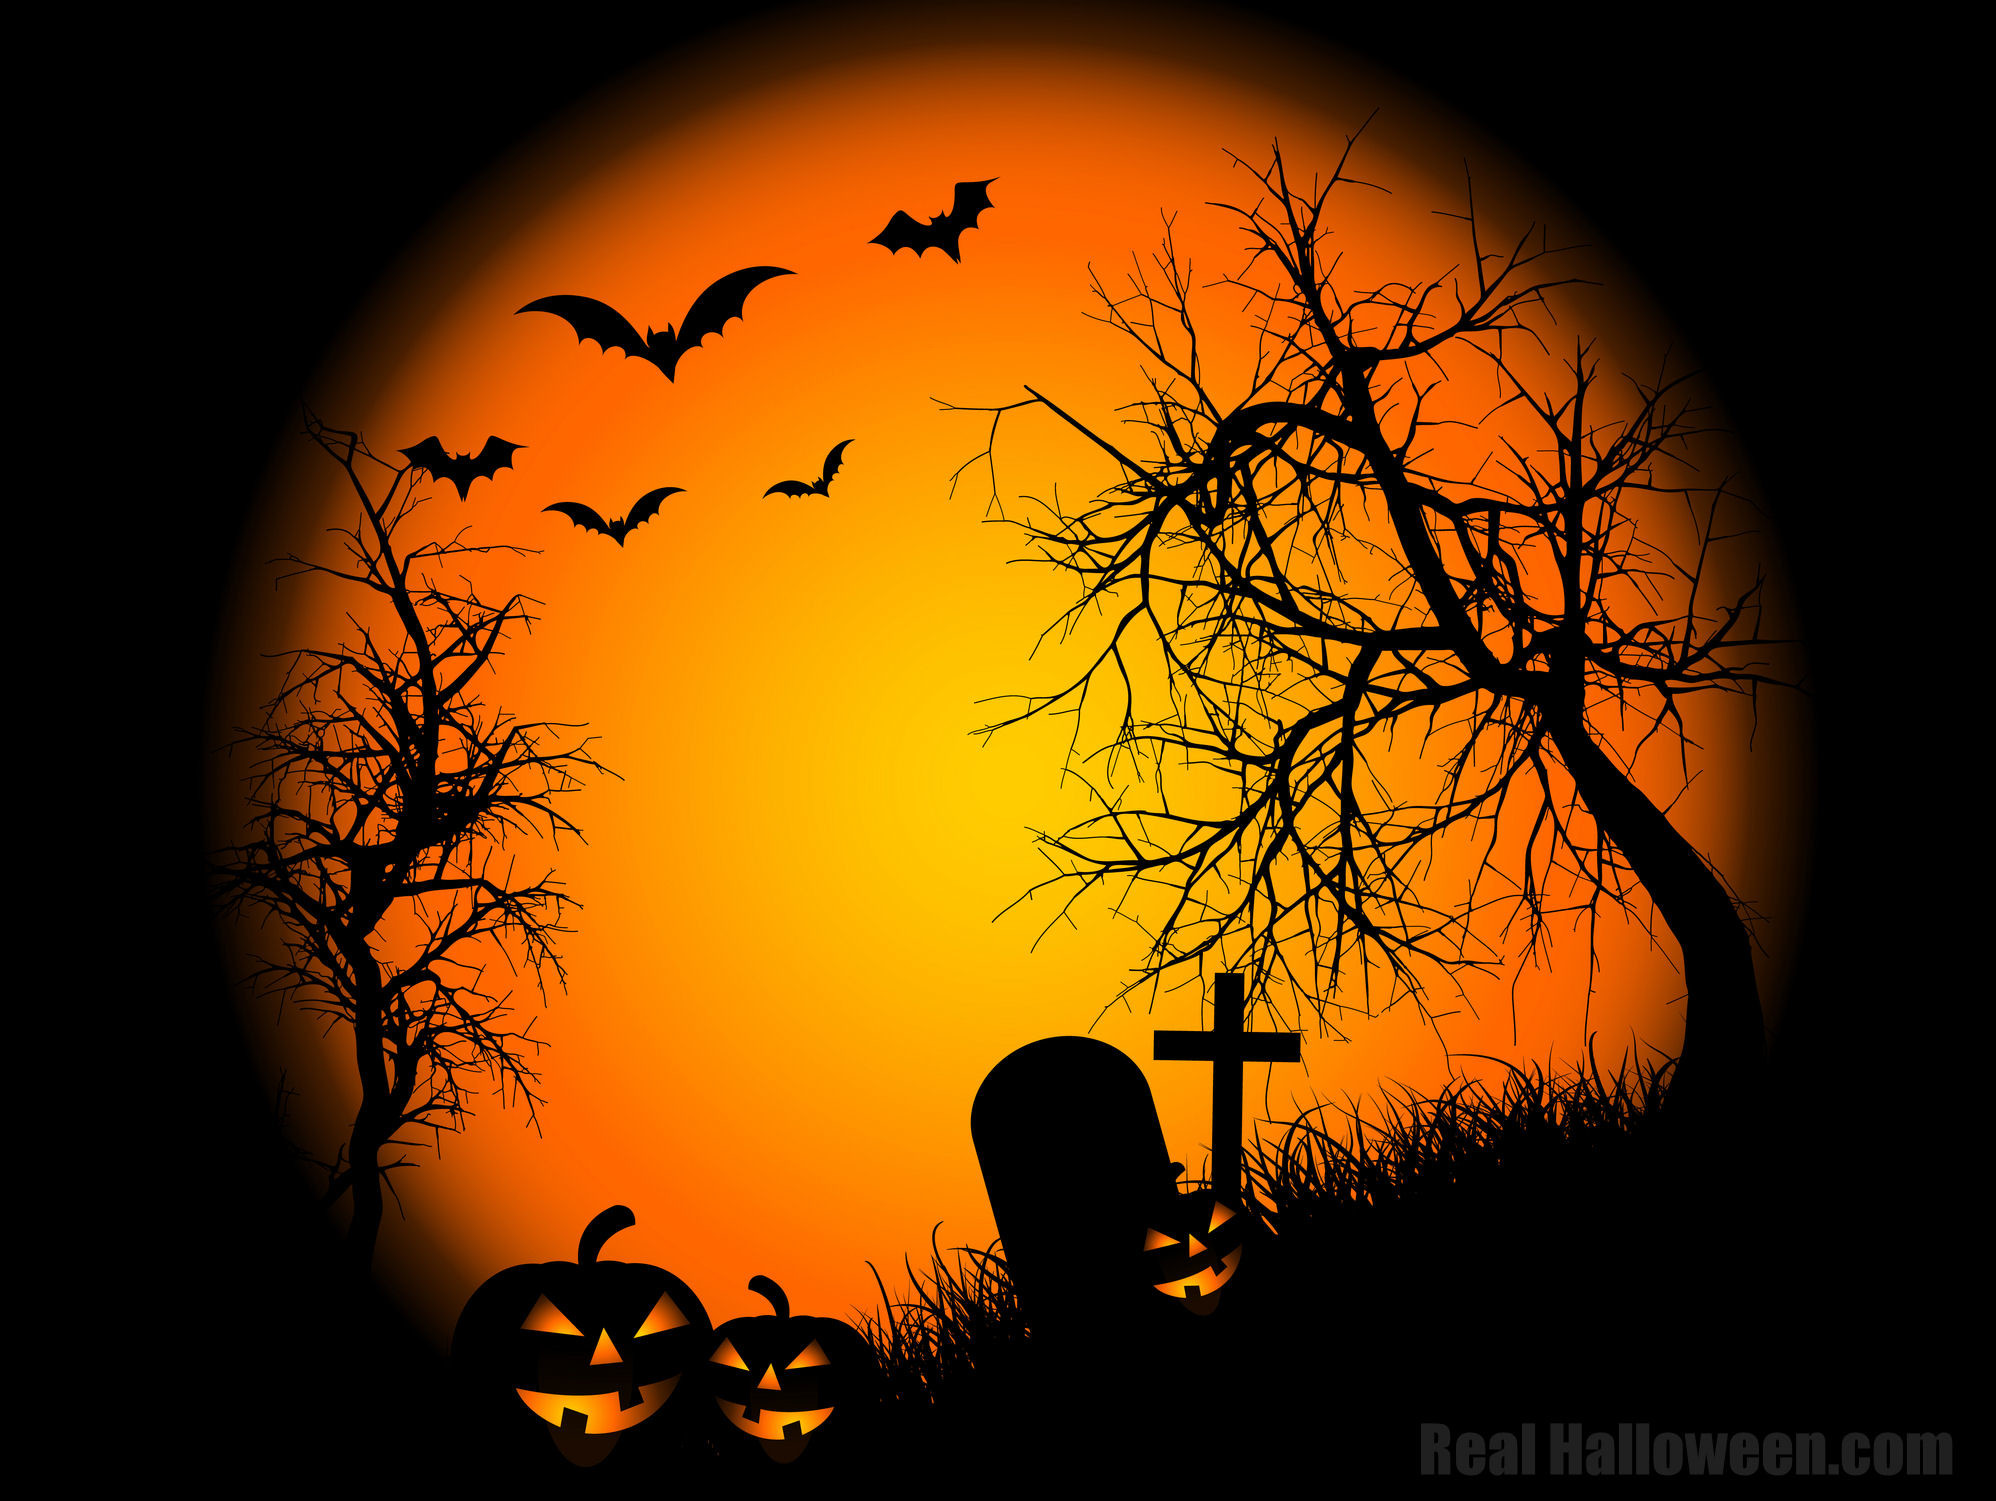 1996x1501 Halloween Background - PowerPoint Backgrounds for Free PowerPoint ...  Halloween Background PowerPoint Backgrounds For Free PowerPoint